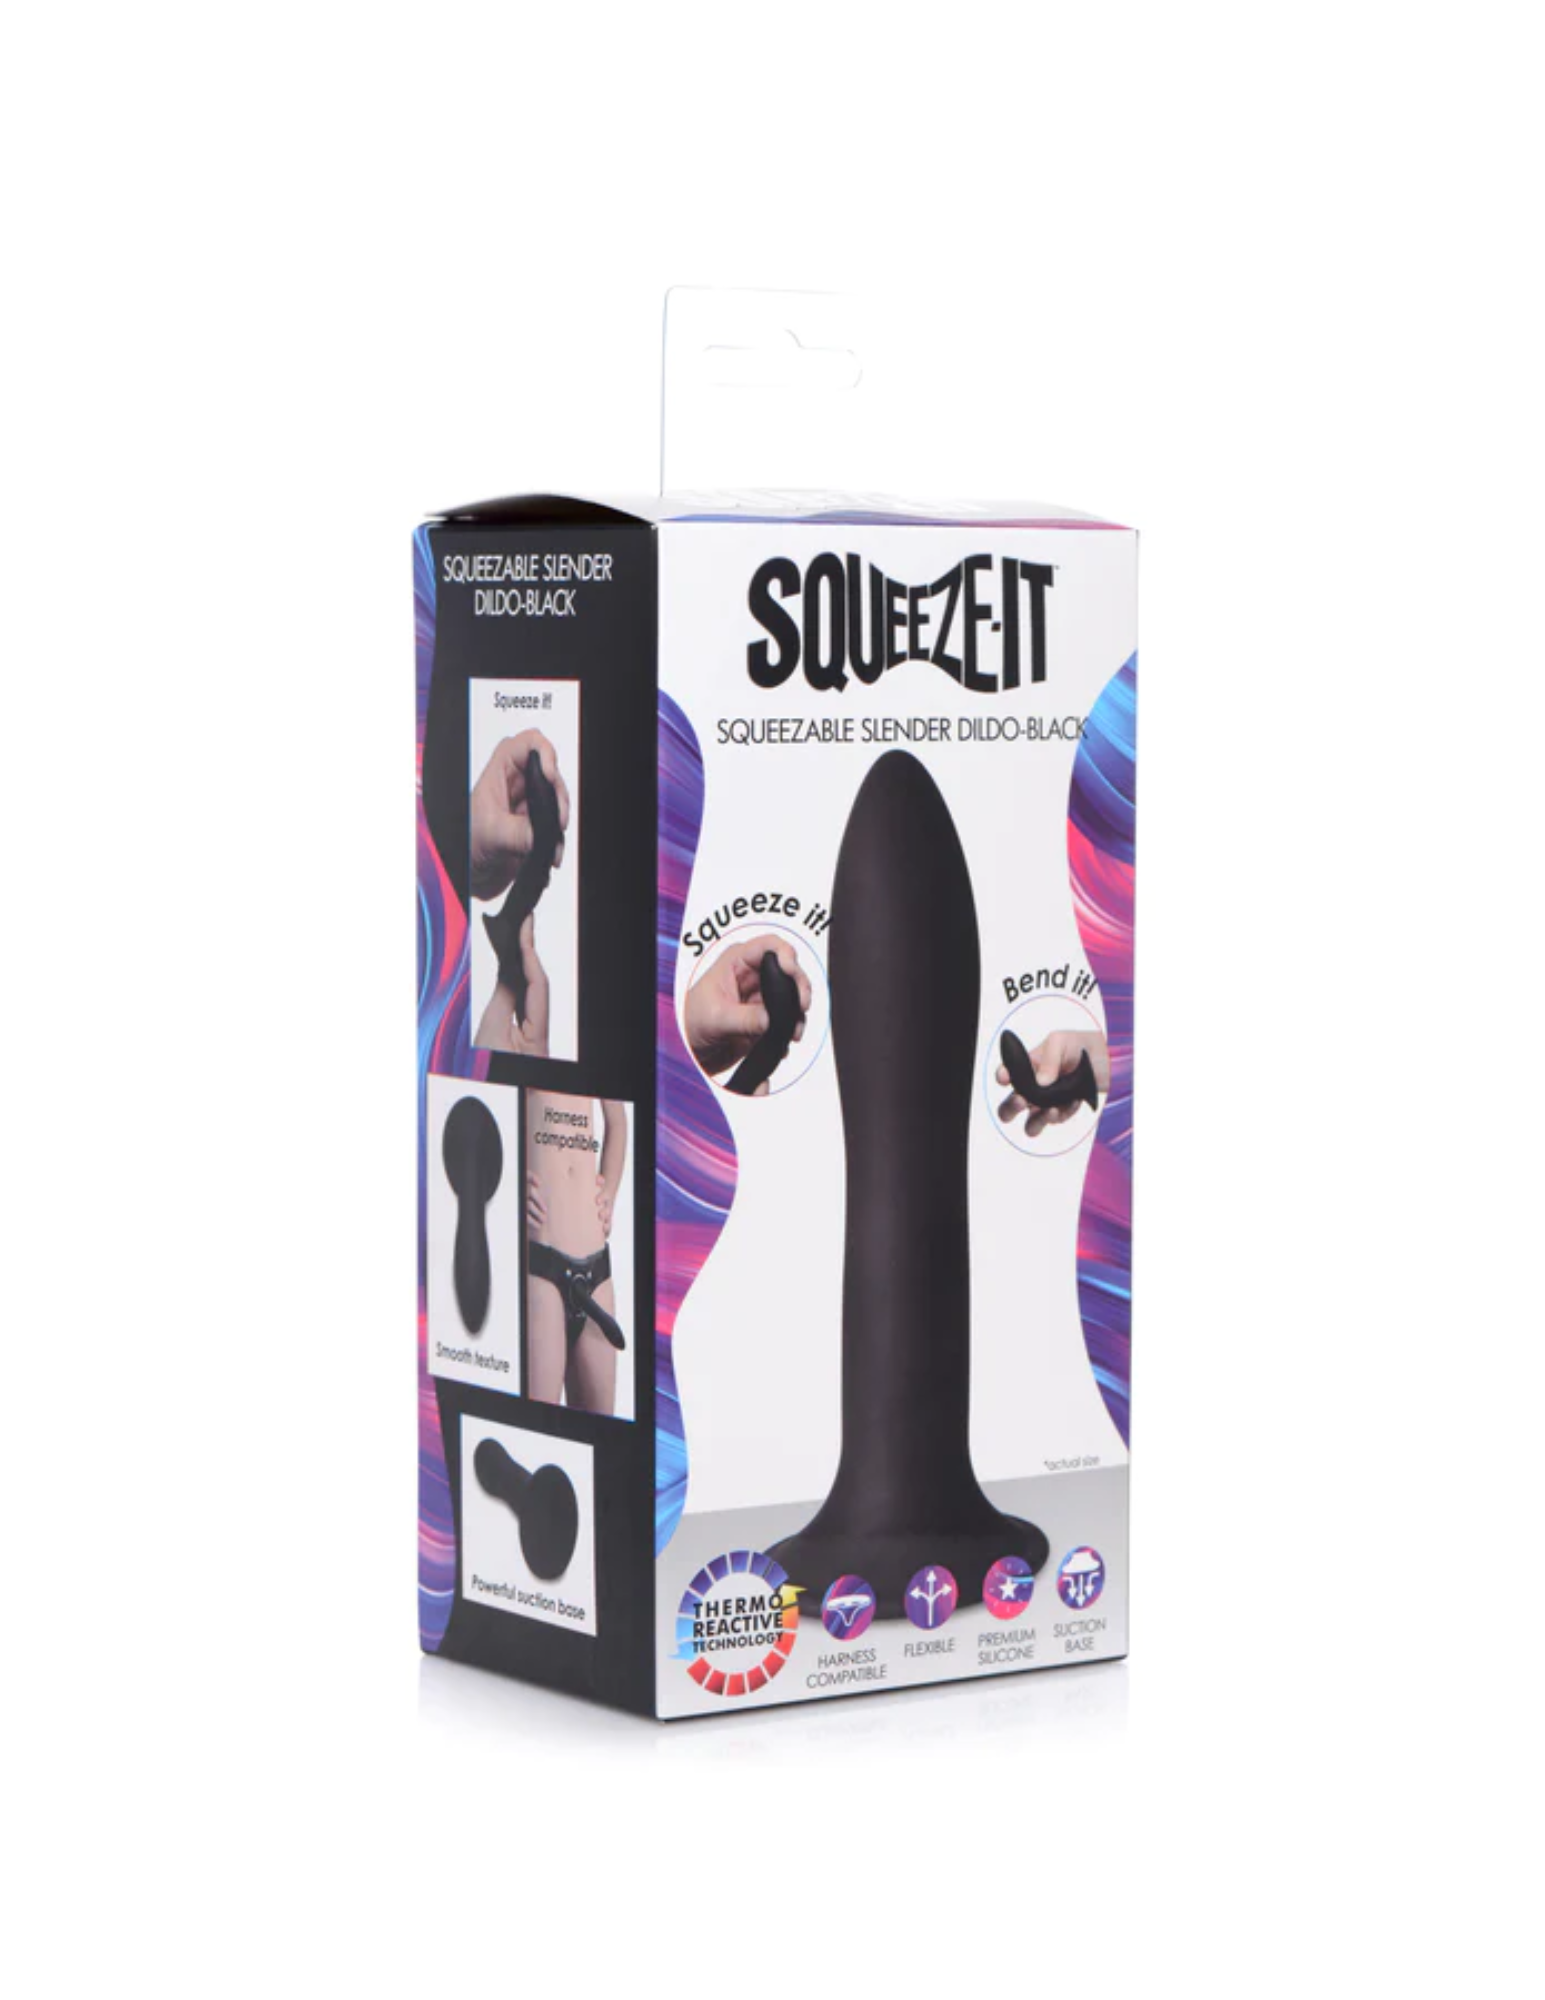 Squeeze-It Squeezable Slender Dildo (black) in package.